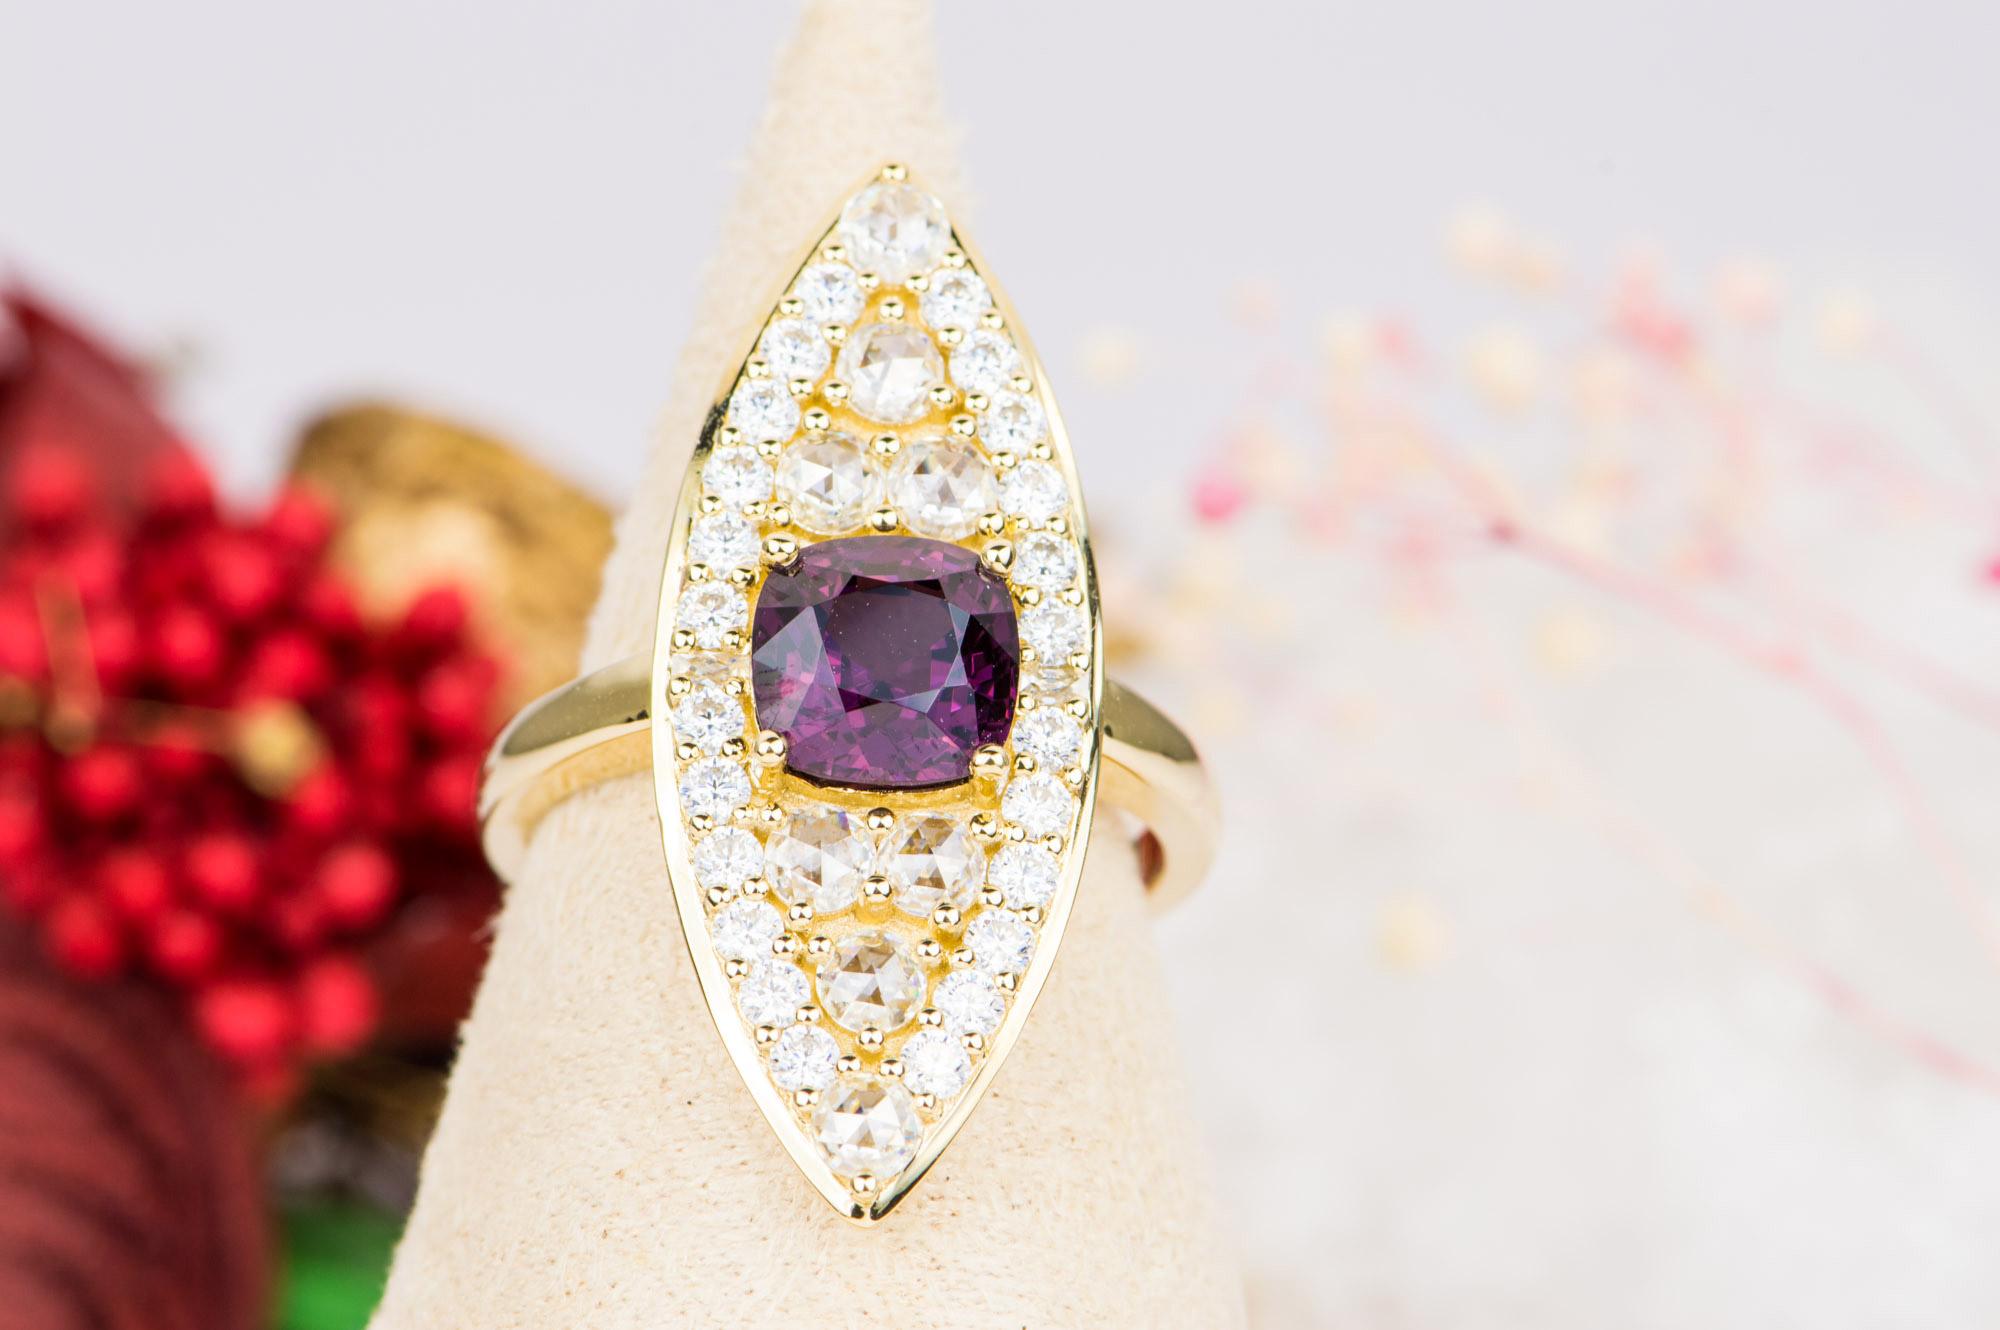 ♥  This is a stunning dinner ring featuring a beautiful royal purple color spinel in the center, surrounded by rows of rose cut and French cut moissanites
♥  The setting is created in a long marquise / navette shape for an elongated effect. Will